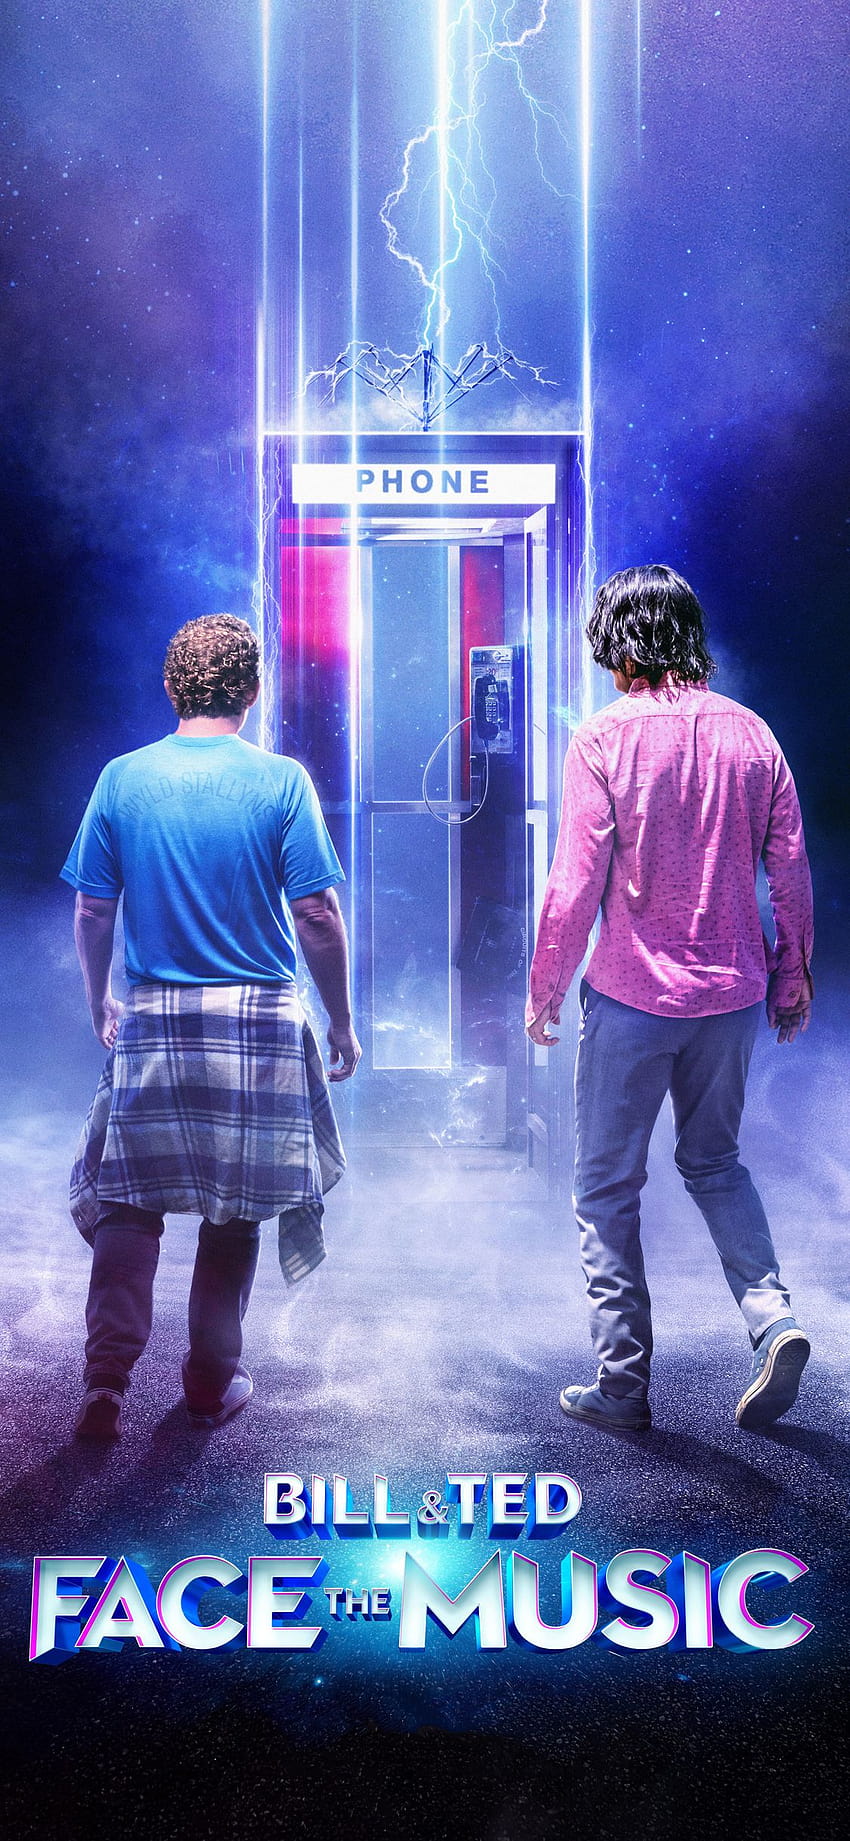 1125x2436 Bill And Ted Face The Music 2020 Movie Iphone XS, Iphone 10, Iphone X, Backgrounds, dan, bill ted face the music wallpaper ponsel HD